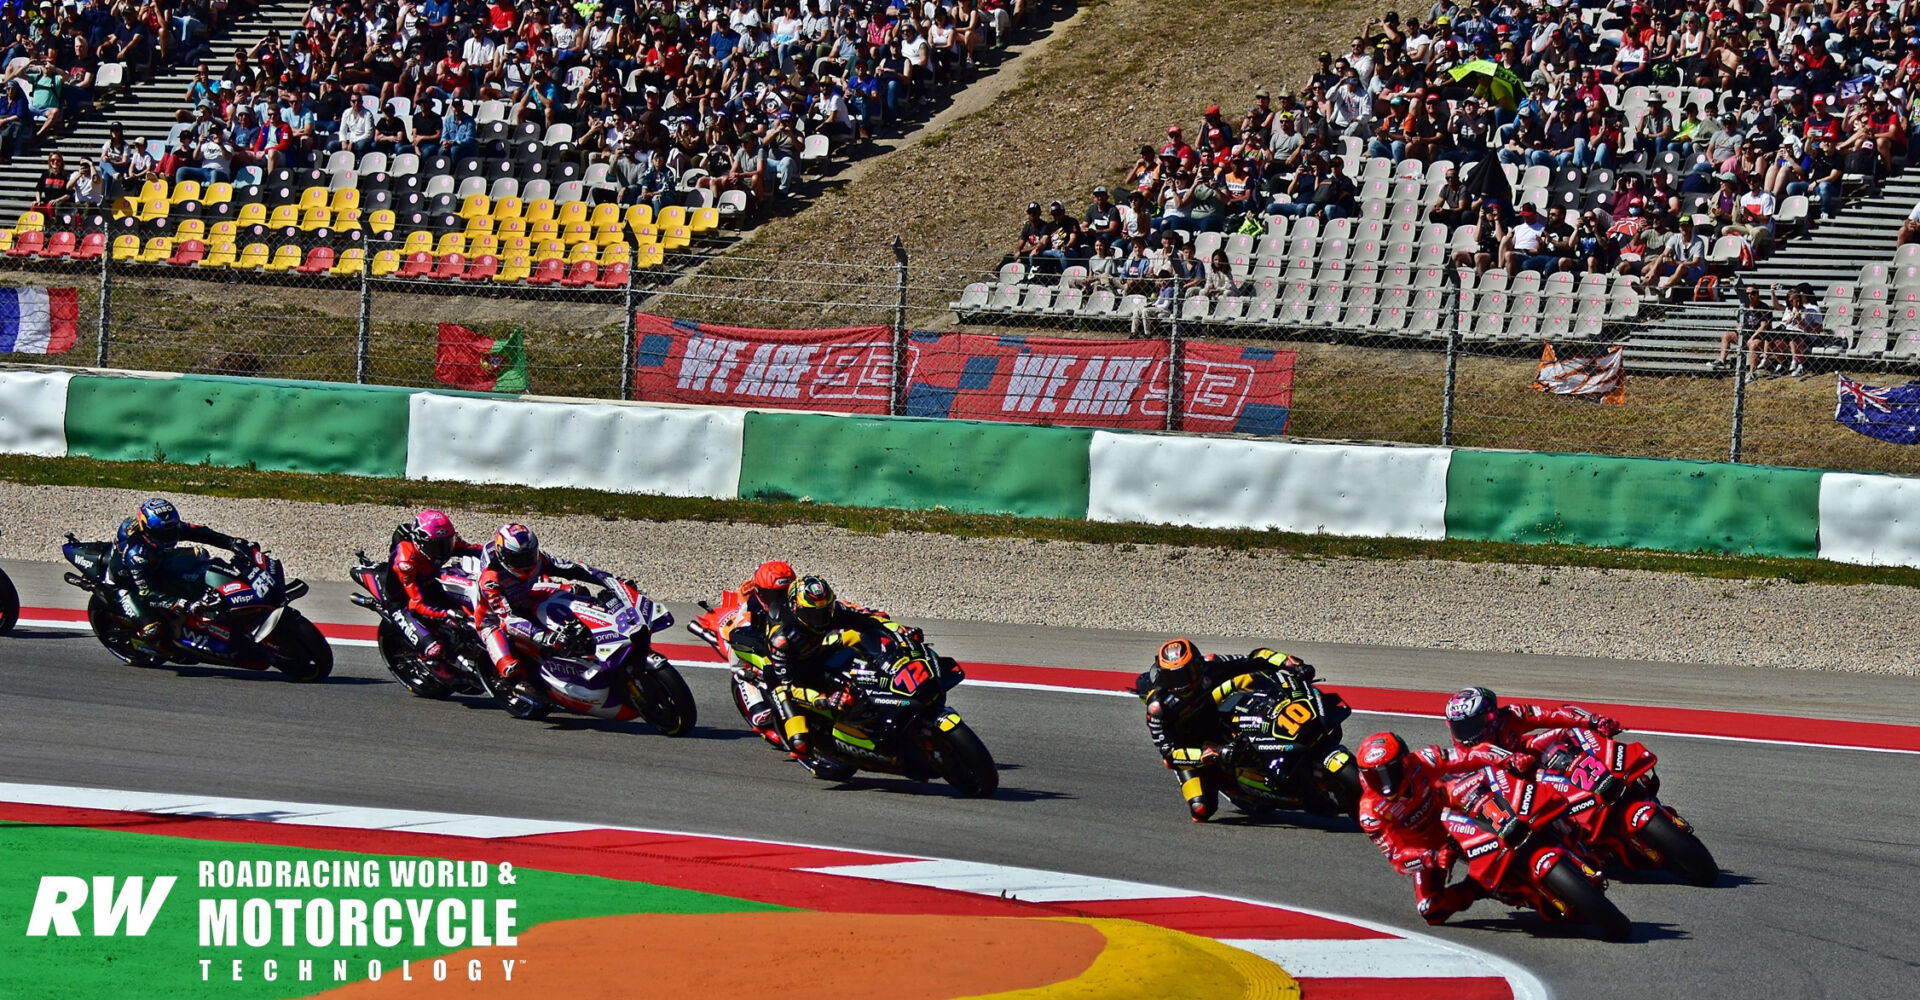 Start of the MotoGP Sprint race at Autodromo do Algarve at the beginning of the 2023 season, with Francesco Bagnaia (1) leading Enea Bastianini (23), Luca Marini (10), Marco Bezzecchi (72), Marc Marquez (hidden), Jorge Martin (89), Aleix Espargaro (hidden) and Miguel Oliveira. If you purchased a seat in the grandstands overlooking Turn Three at the event, that grandstand was the only place you were allowed to go anywhere on the track without a separate ticket. Photo by Michael Gougis.